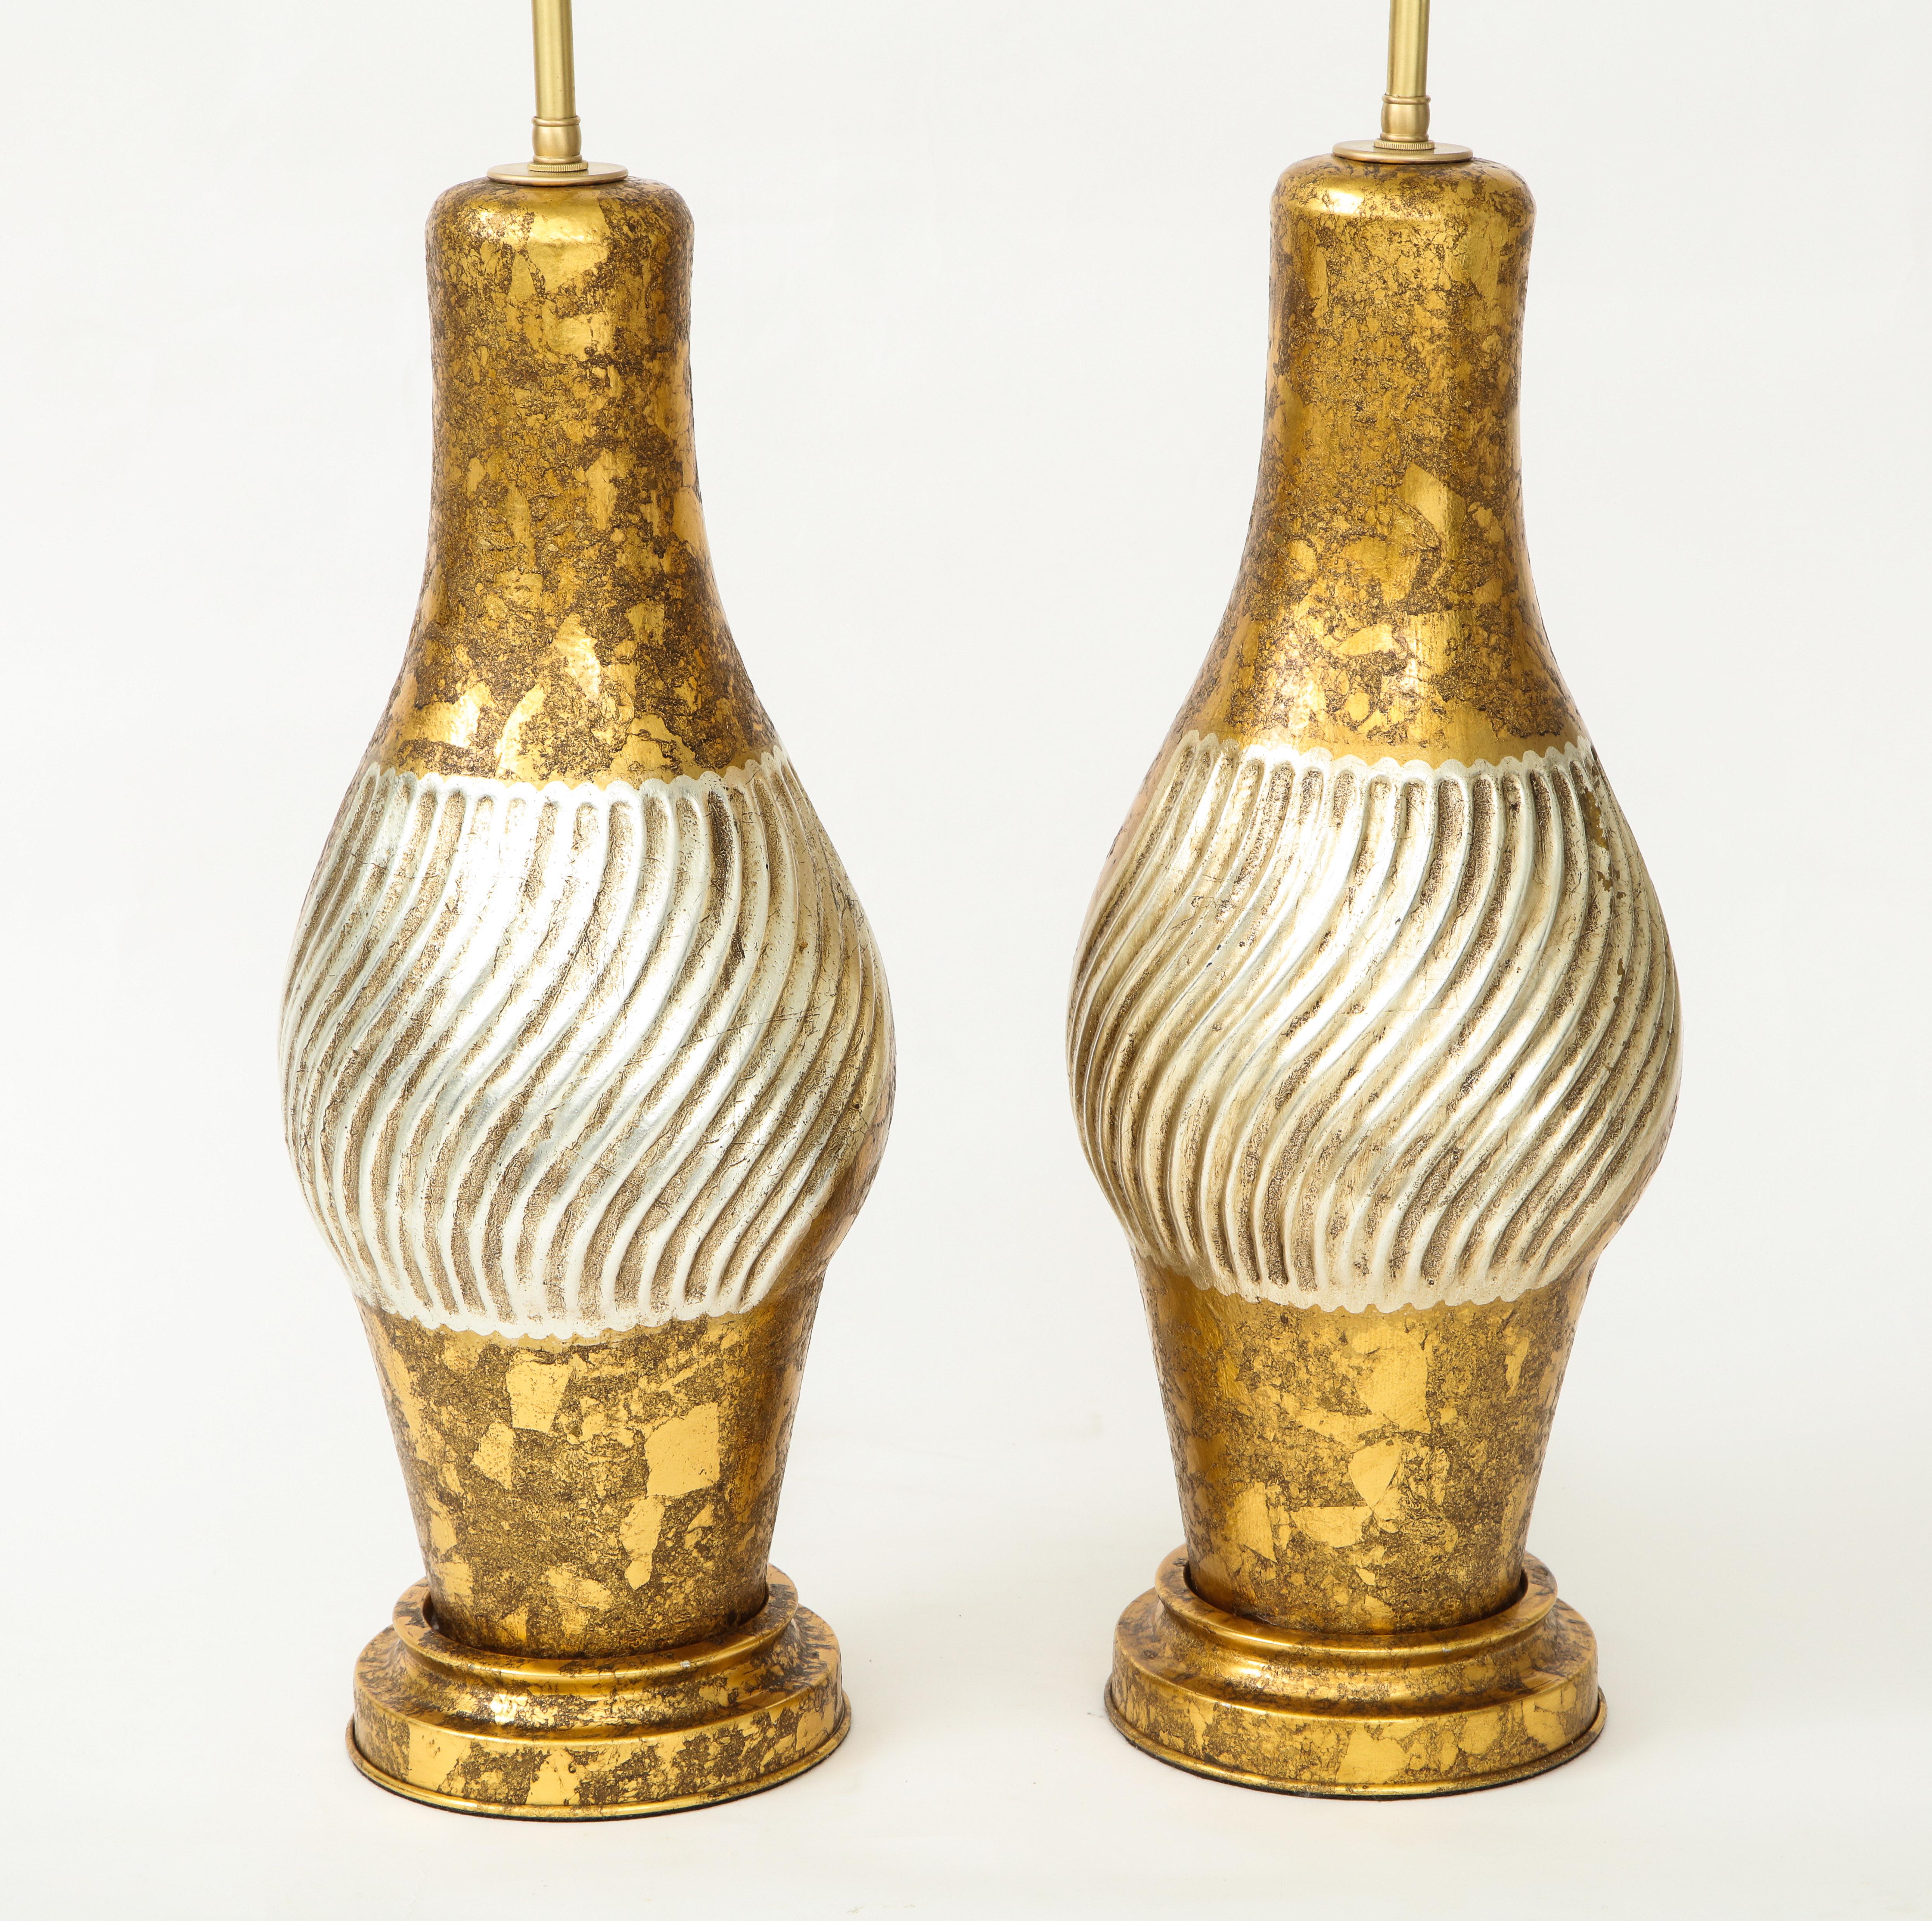 James Mont Style Gilded Porcelain Lamps In Excellent Condition For Sale In New York, NY